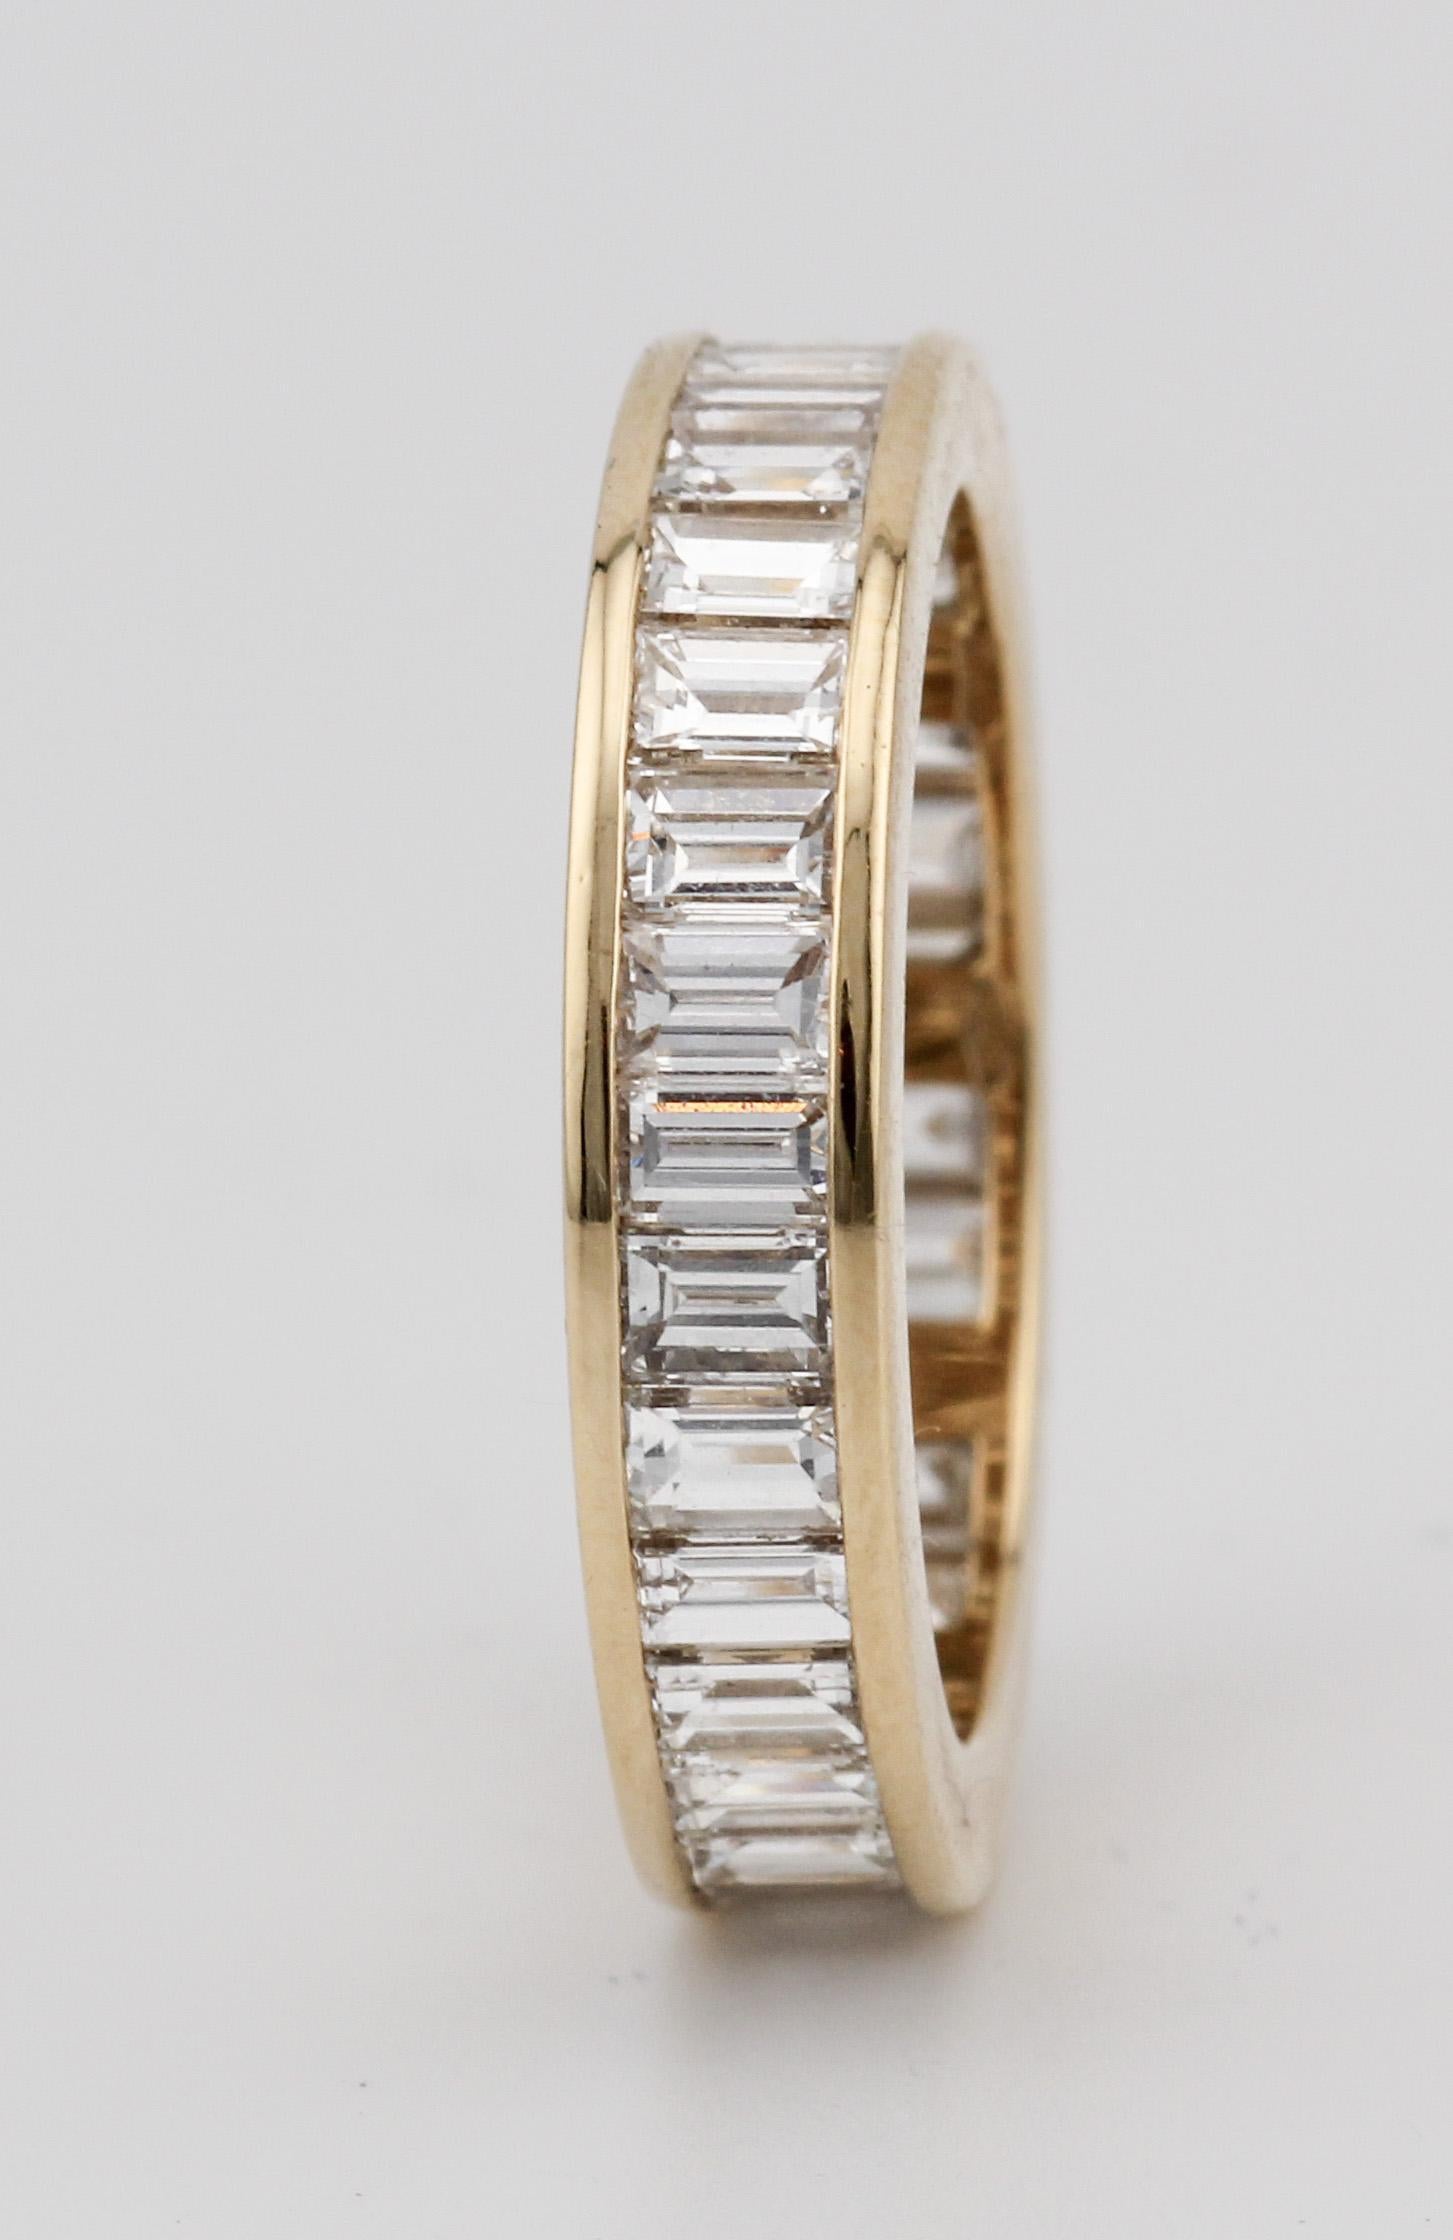 Introducing the epitome of luxury and sophistication, the Bulgari Baguette Diamond 18K Yellow Gold Eternity Band redefines elegance with its timeless design and unparalleled craftsmanship. Exquisitely crafted by Bulgari, the renowned Italian